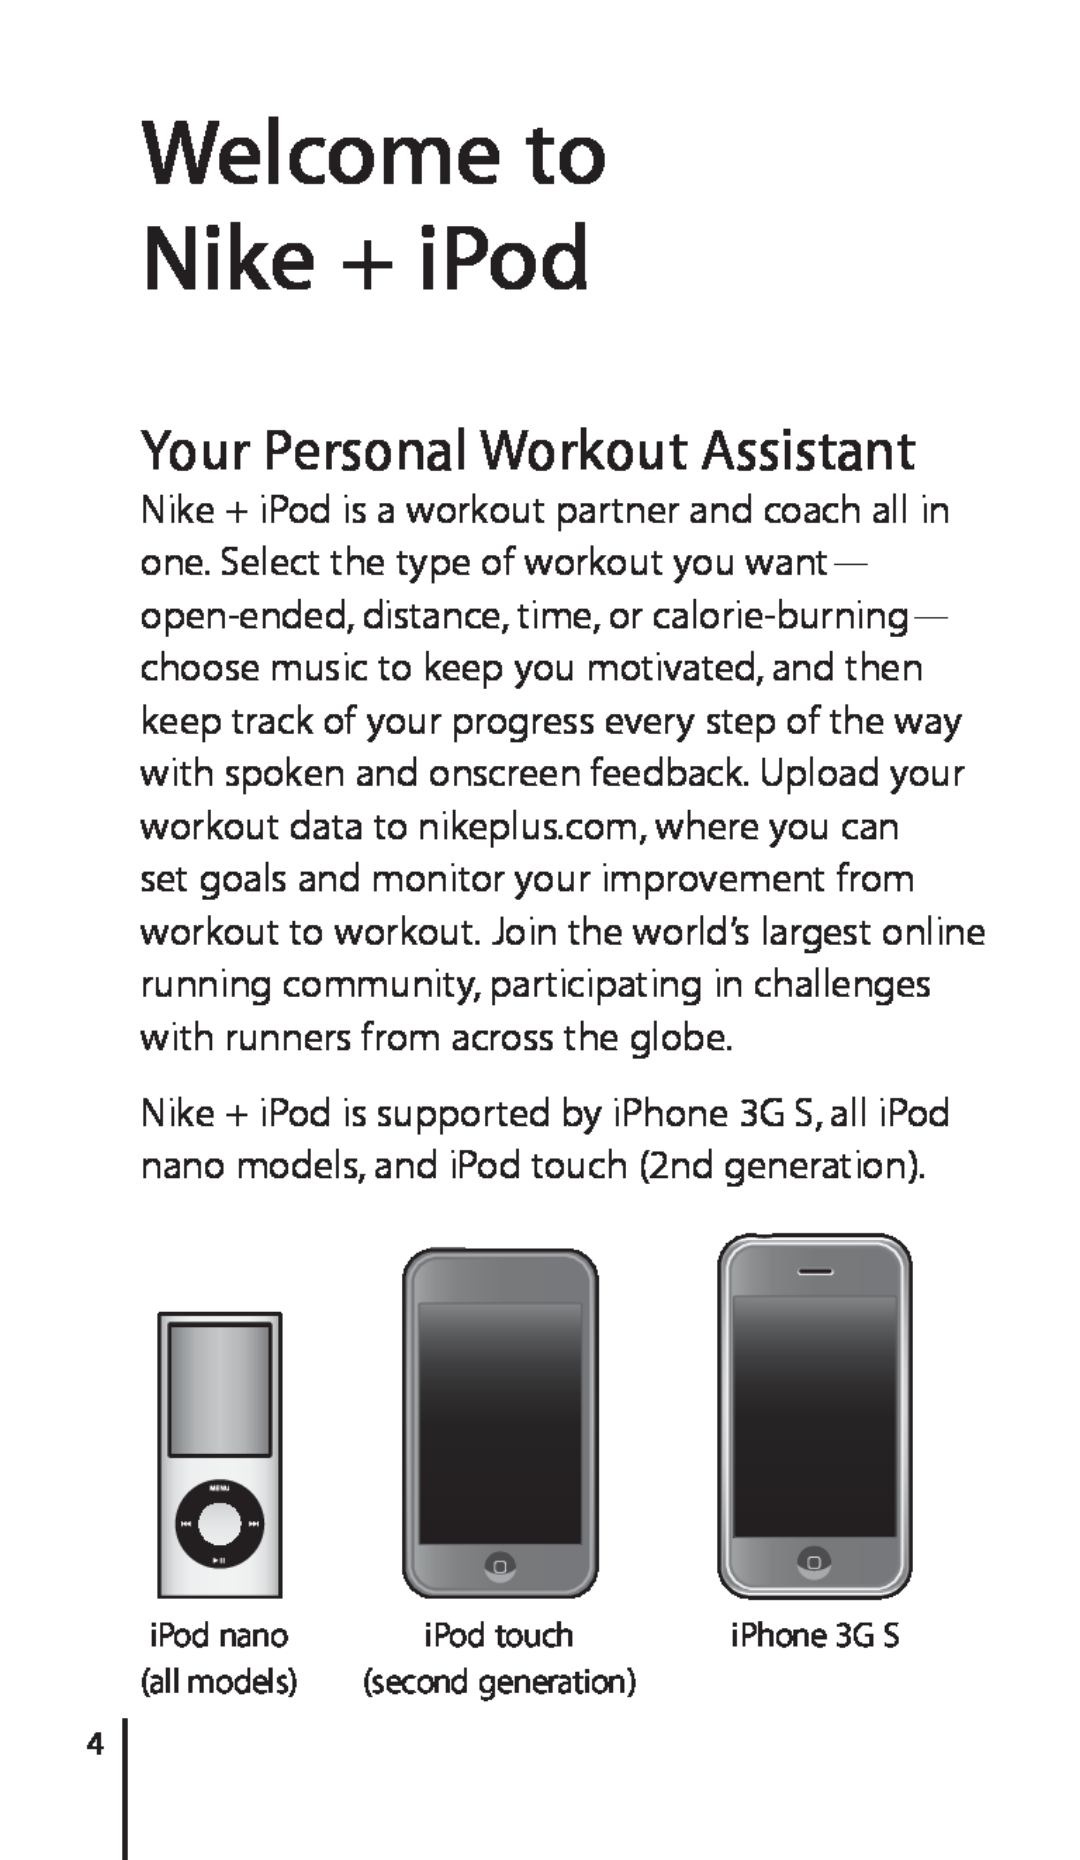 Apple Nike + iPod Sensor, 034-4945-A manual Welcome to Nike + iPod, Your Personal Workout Assistant 